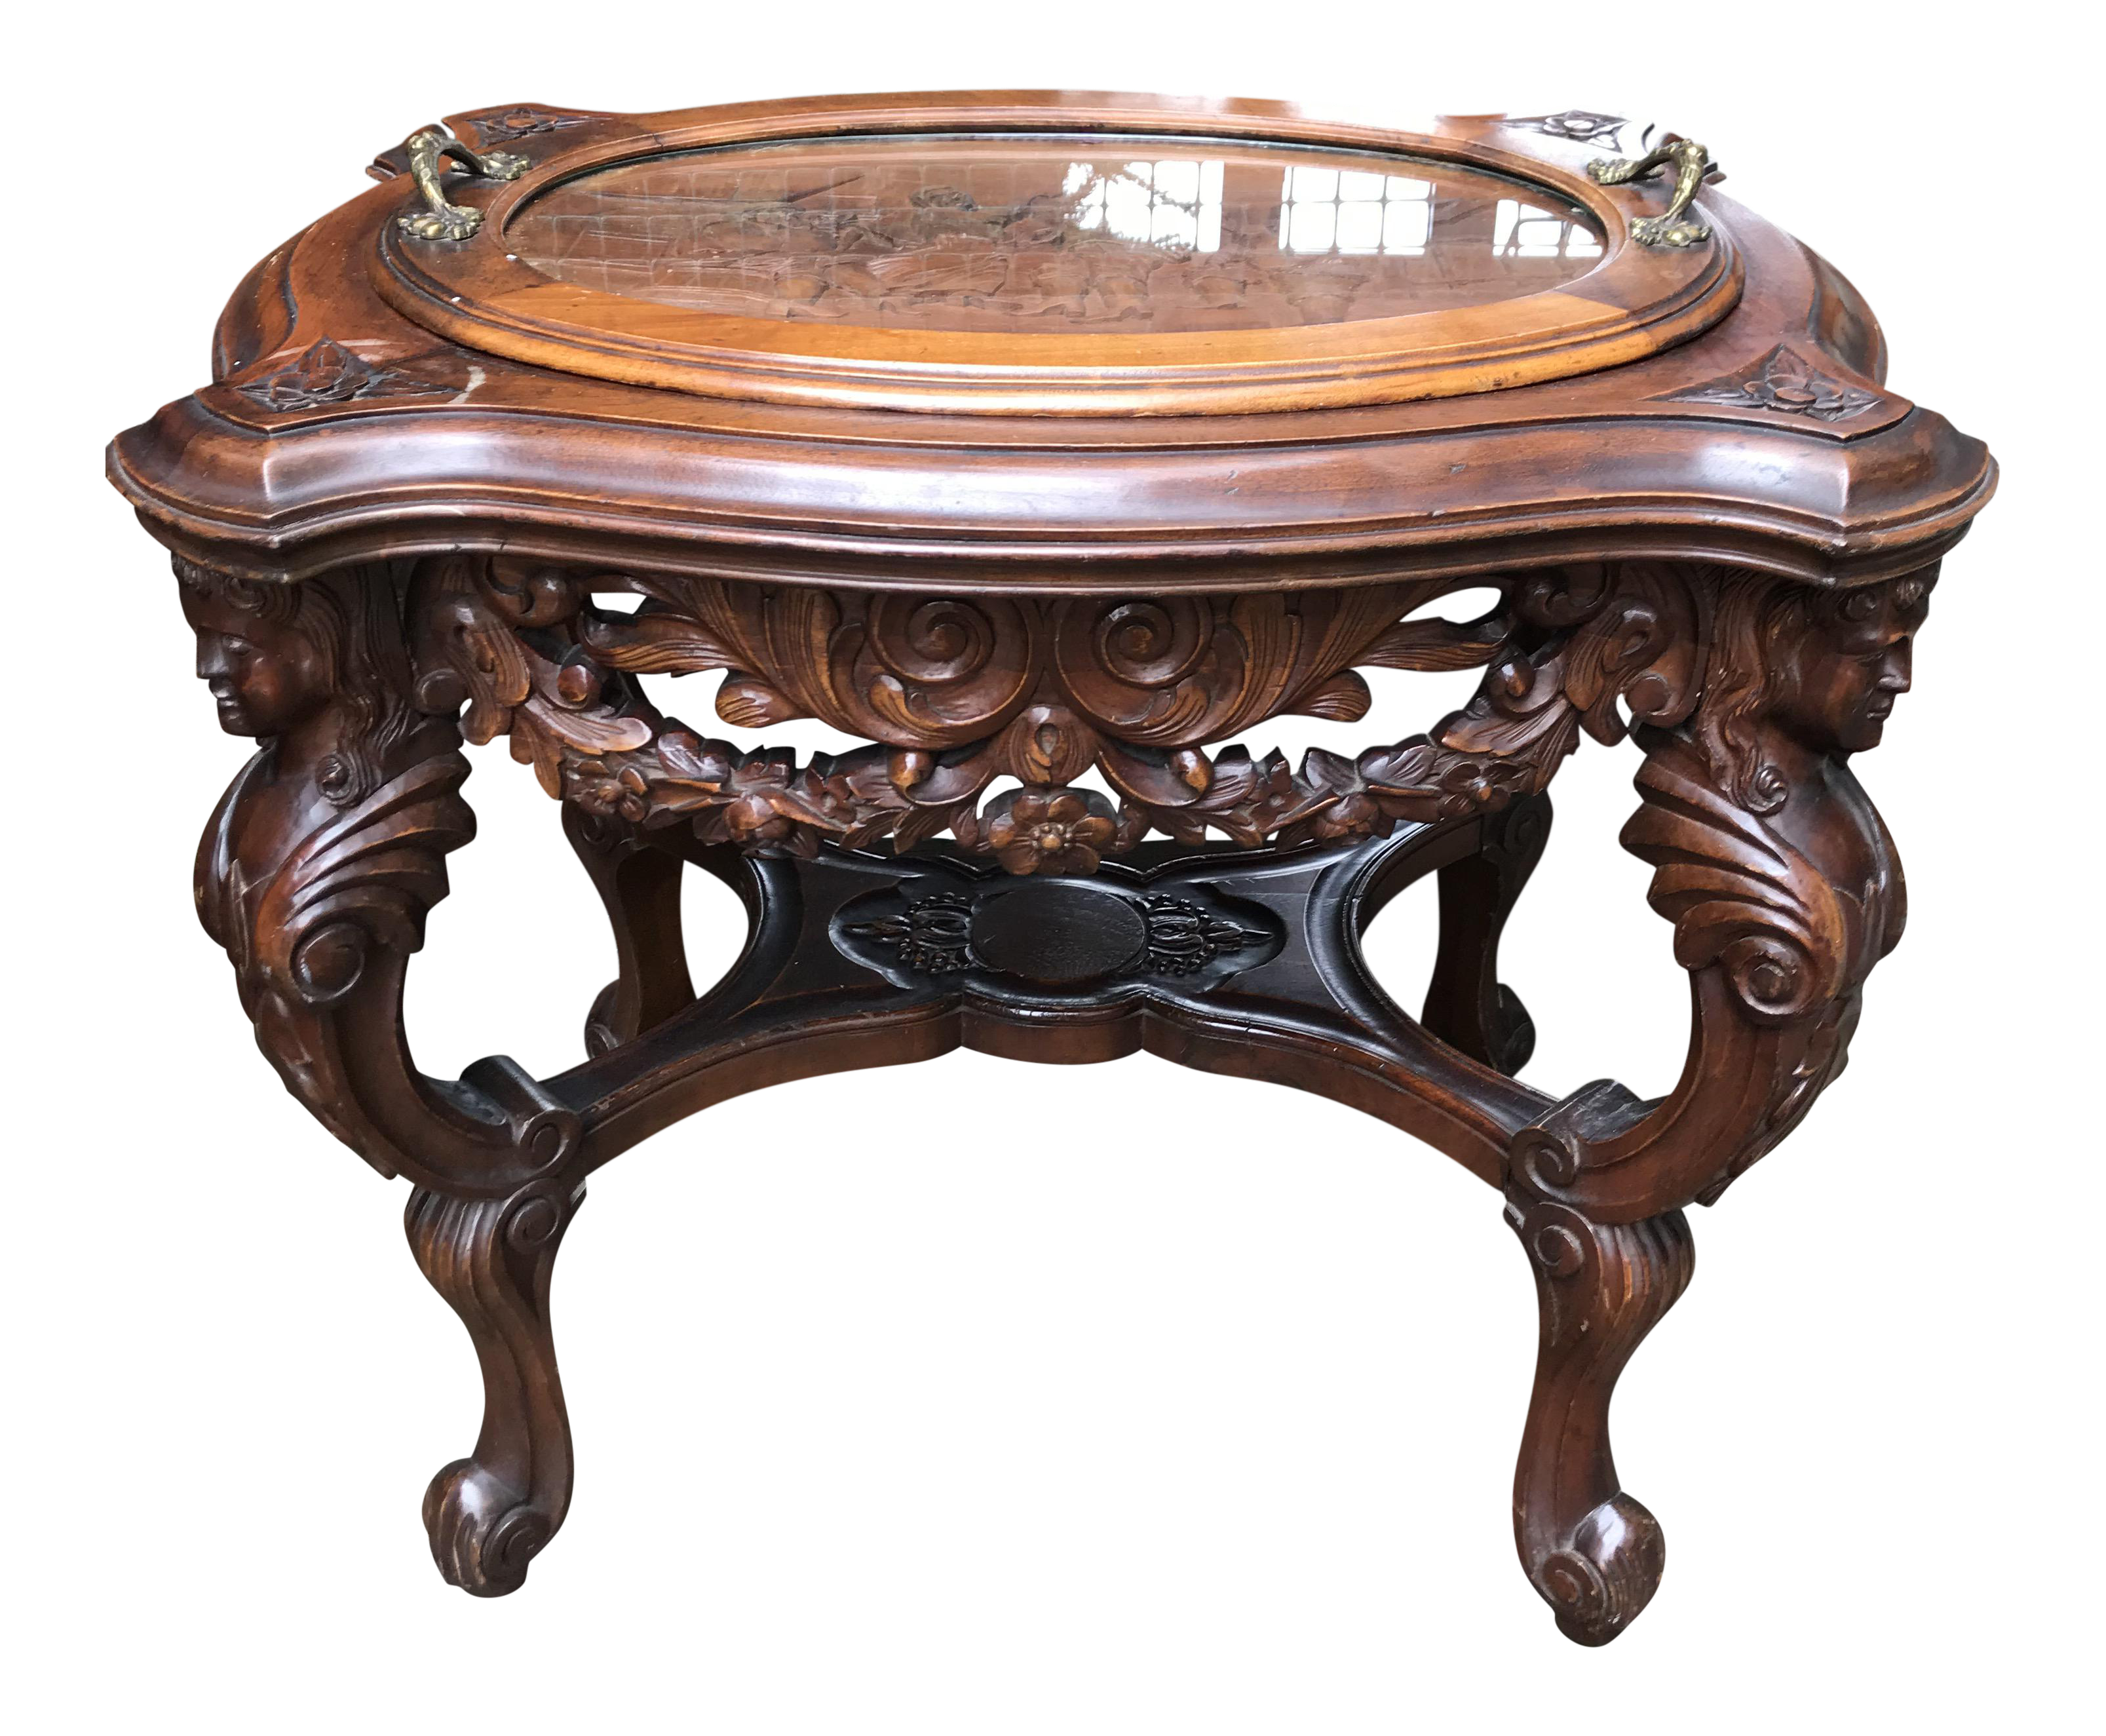 hand carved occasional table removable serving tray chairish accent with chairside ikea glass nesting end tables kitchen furniture clothes organiser vintage french bedside narrow